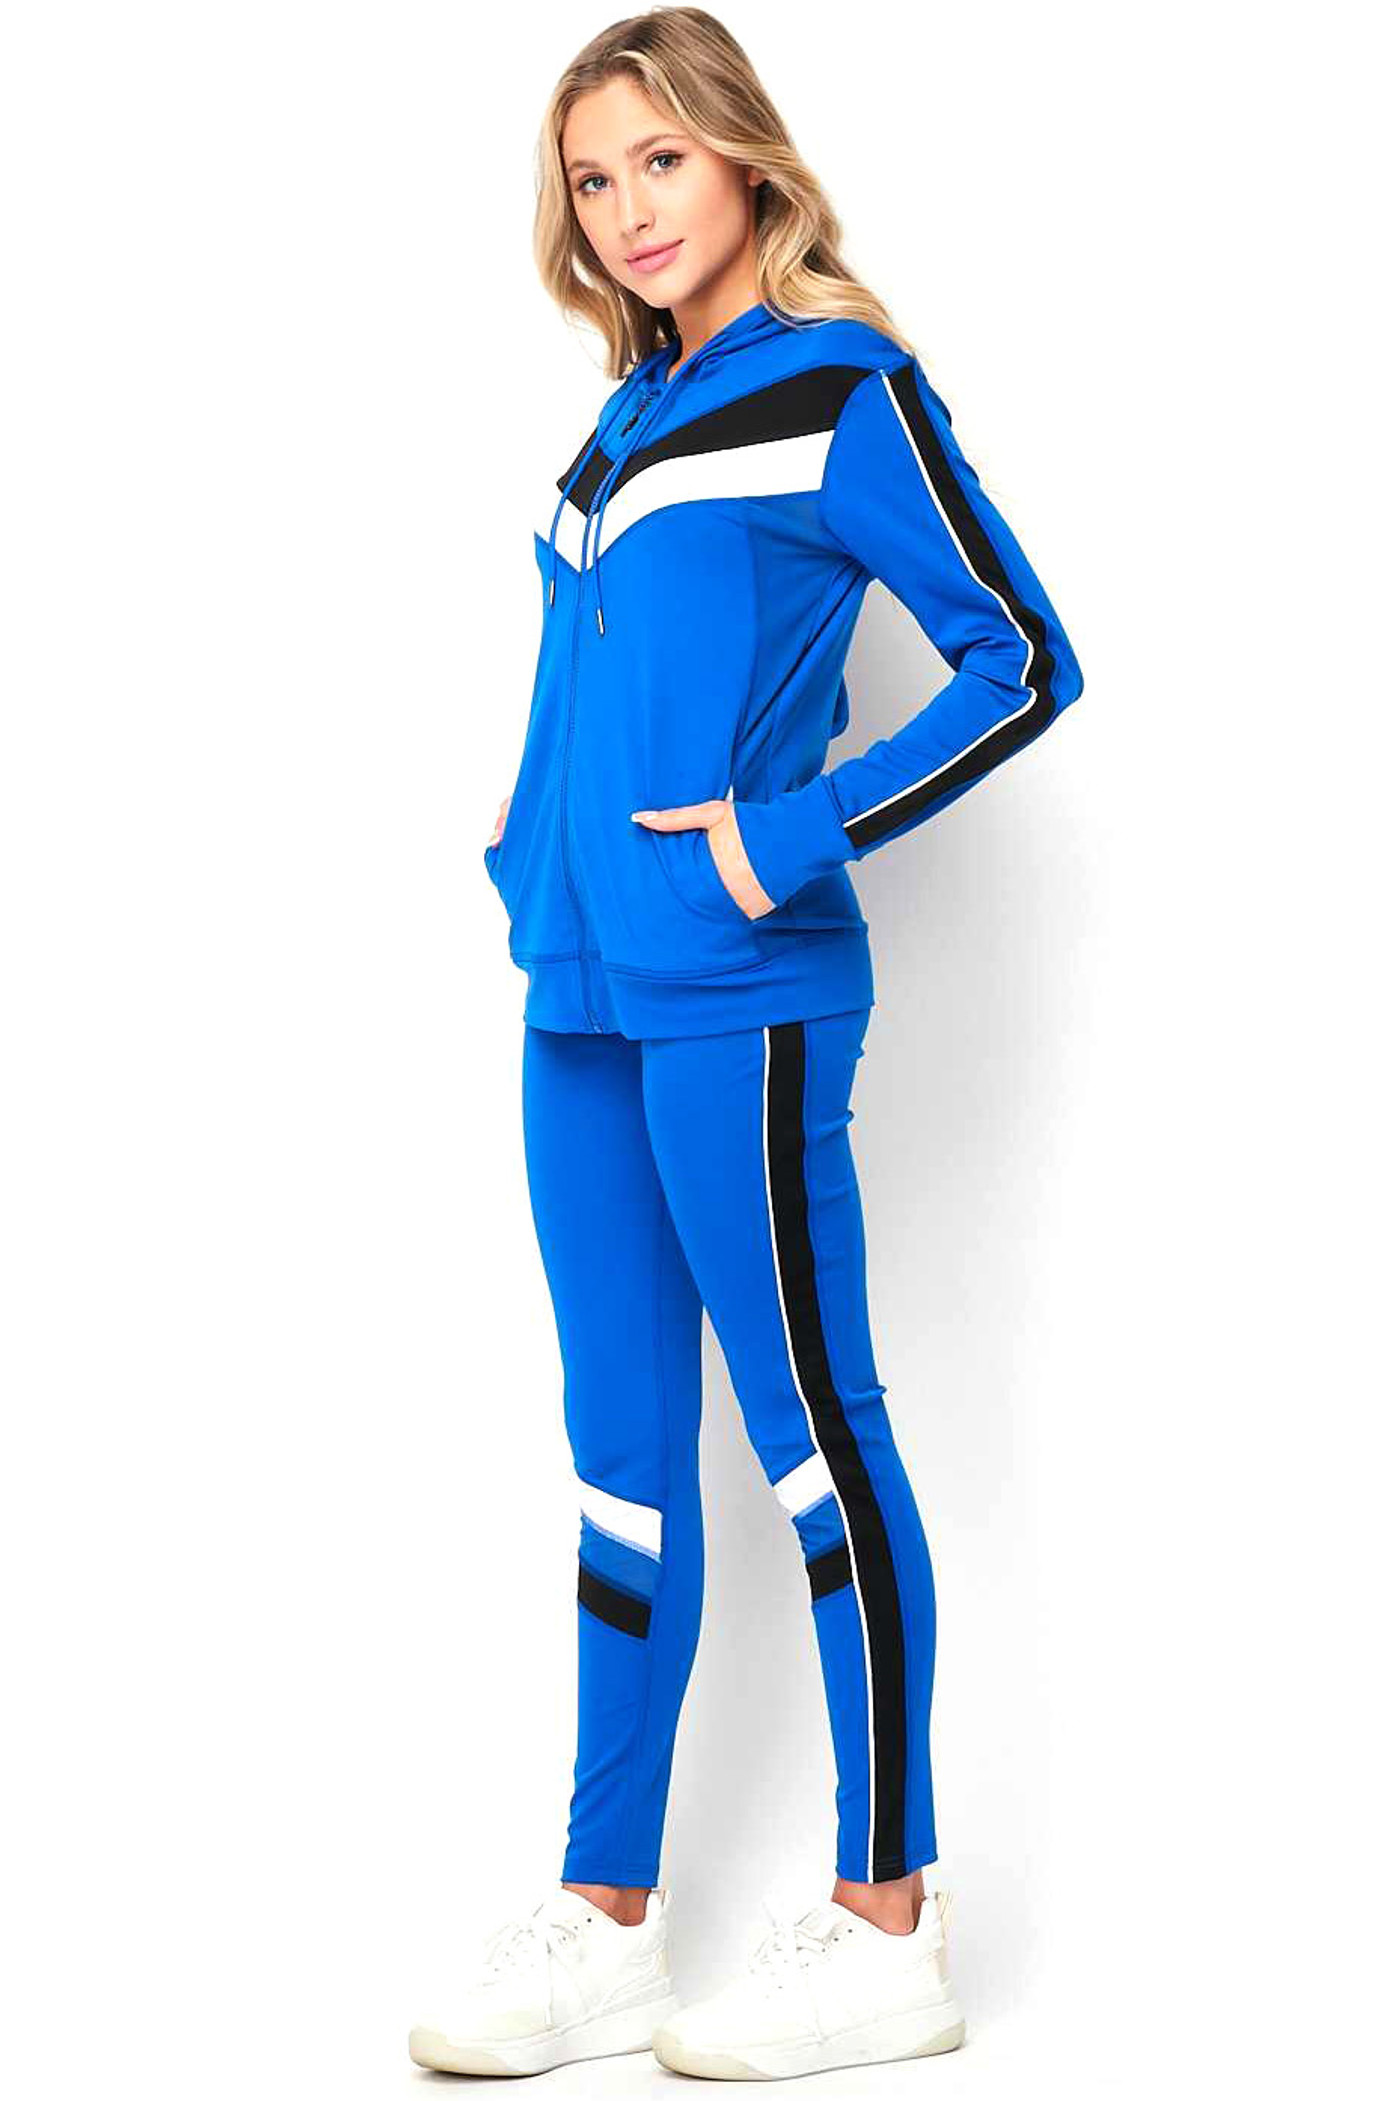 Workout Outfit, Hooded Hoodie, Harem Pants Set, Women Tracksuit